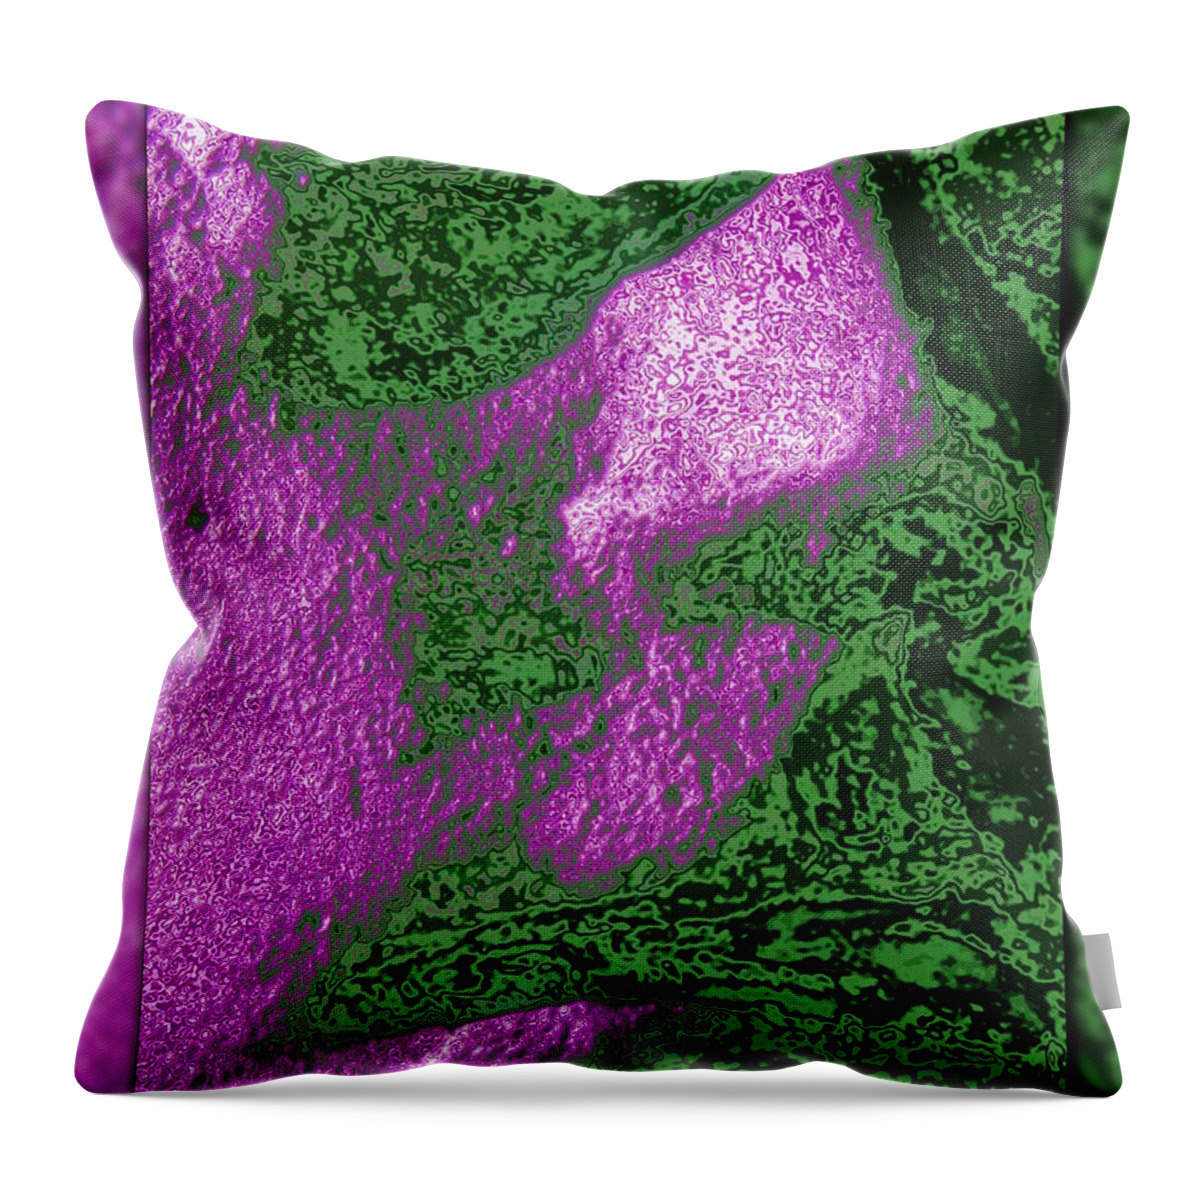 Abstract Throw Pillow featuring the digital art The Sentinel 13 by Tim Allen